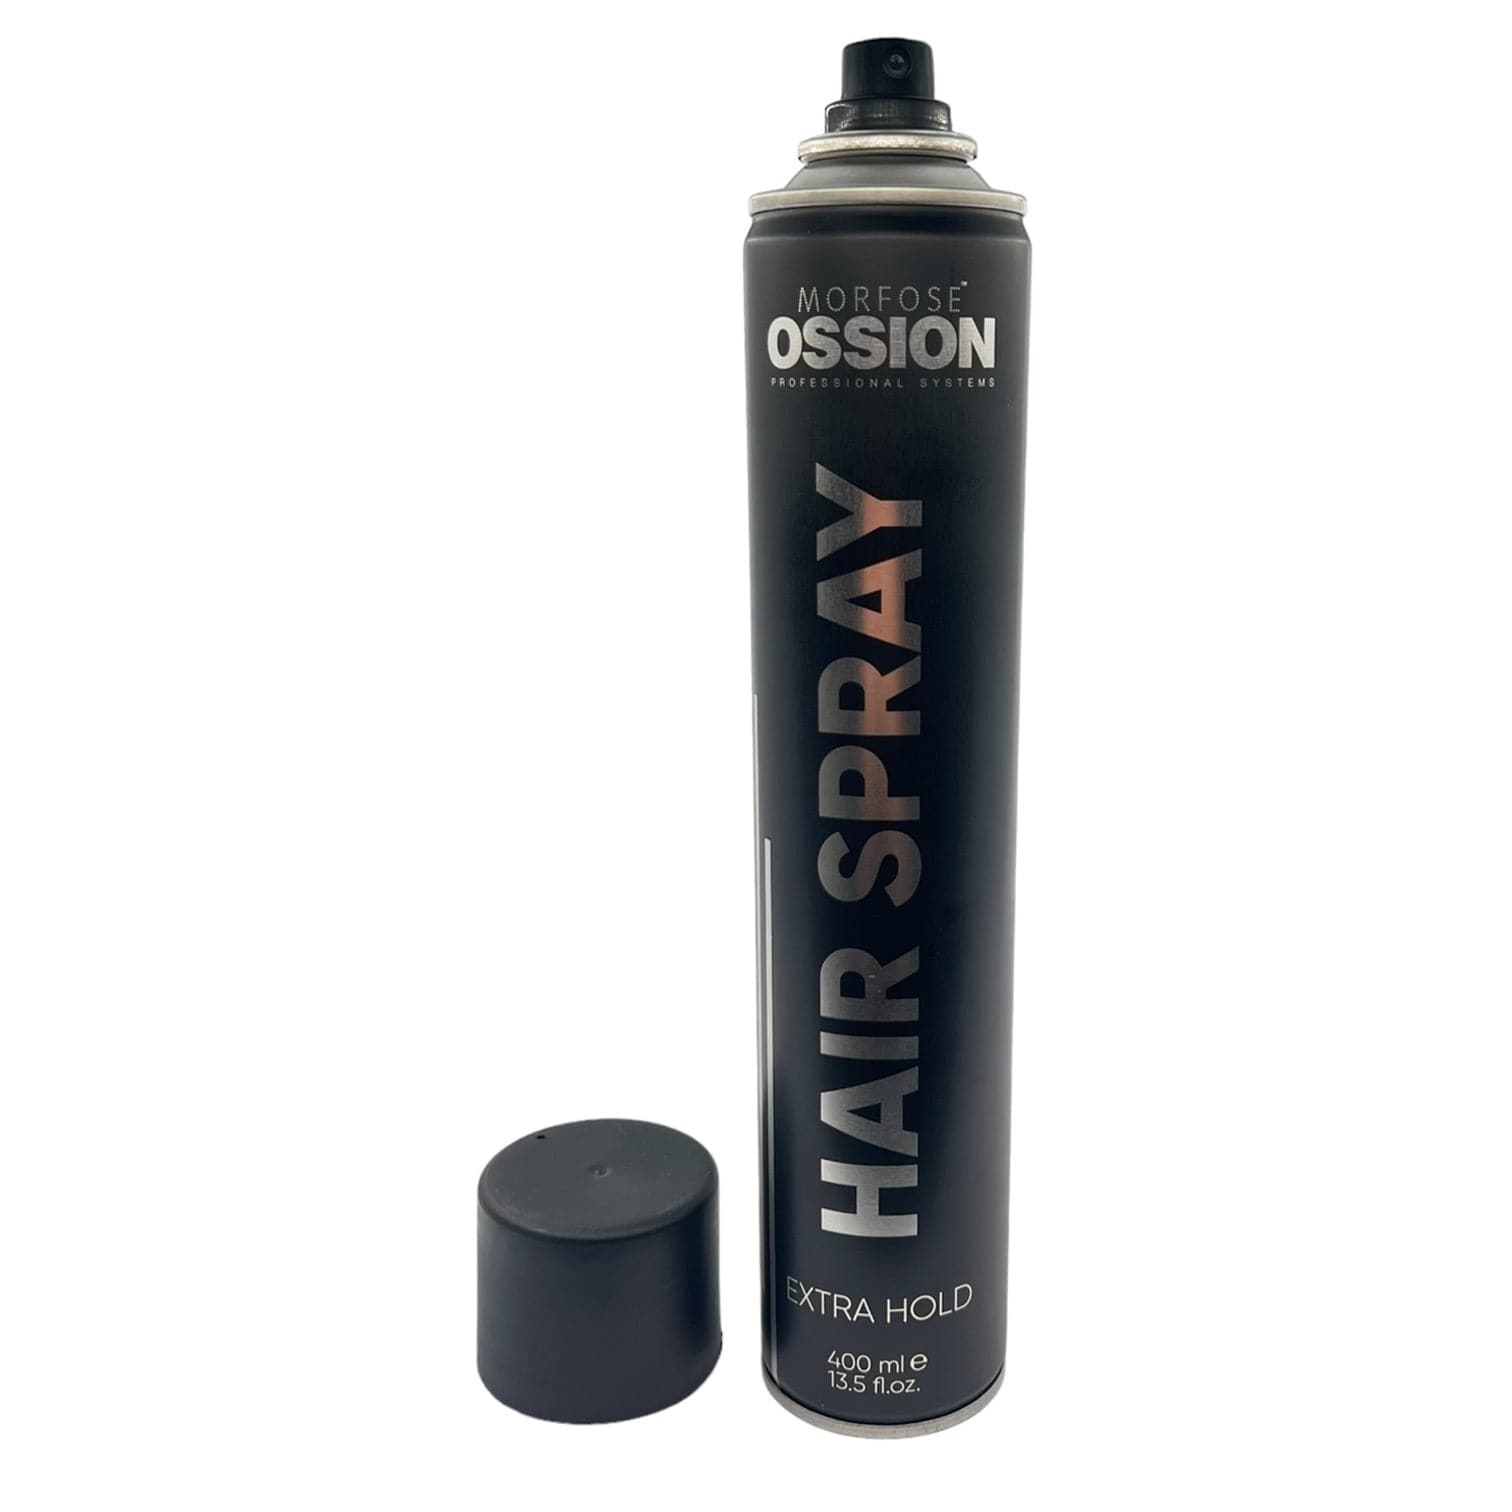 Morfose - Ossion Extra Hold Hair Spray 400ml